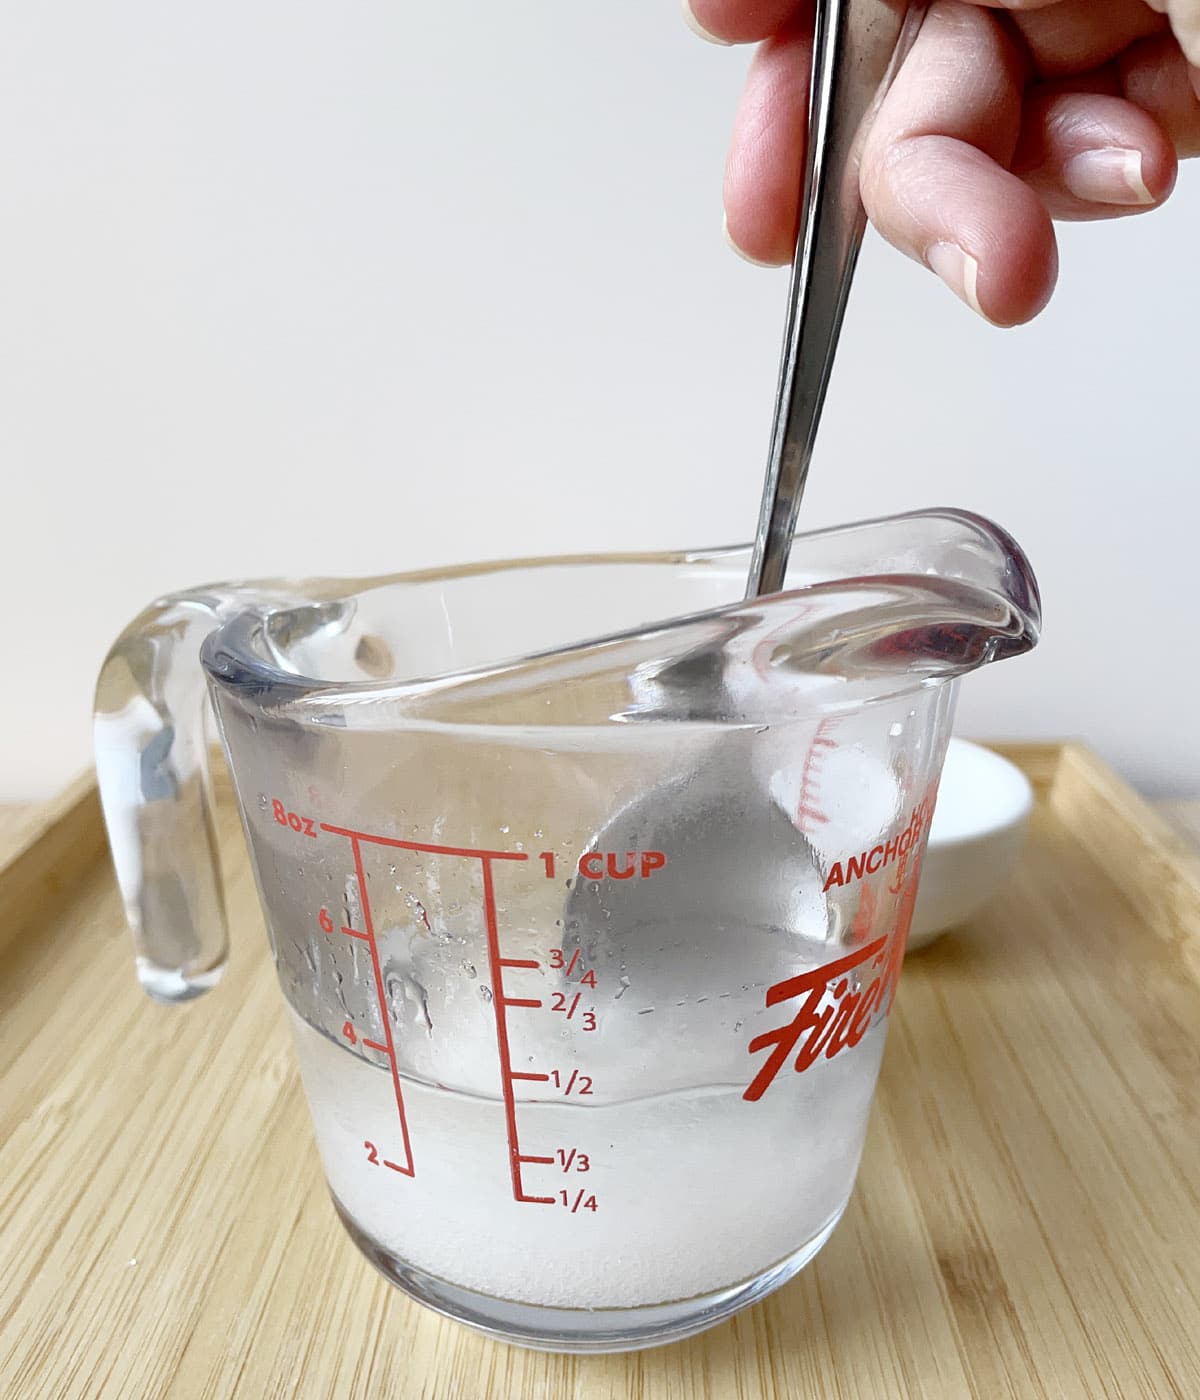 A hand holding a spoon, stirring white sugar in a water in a glass measuring cup.